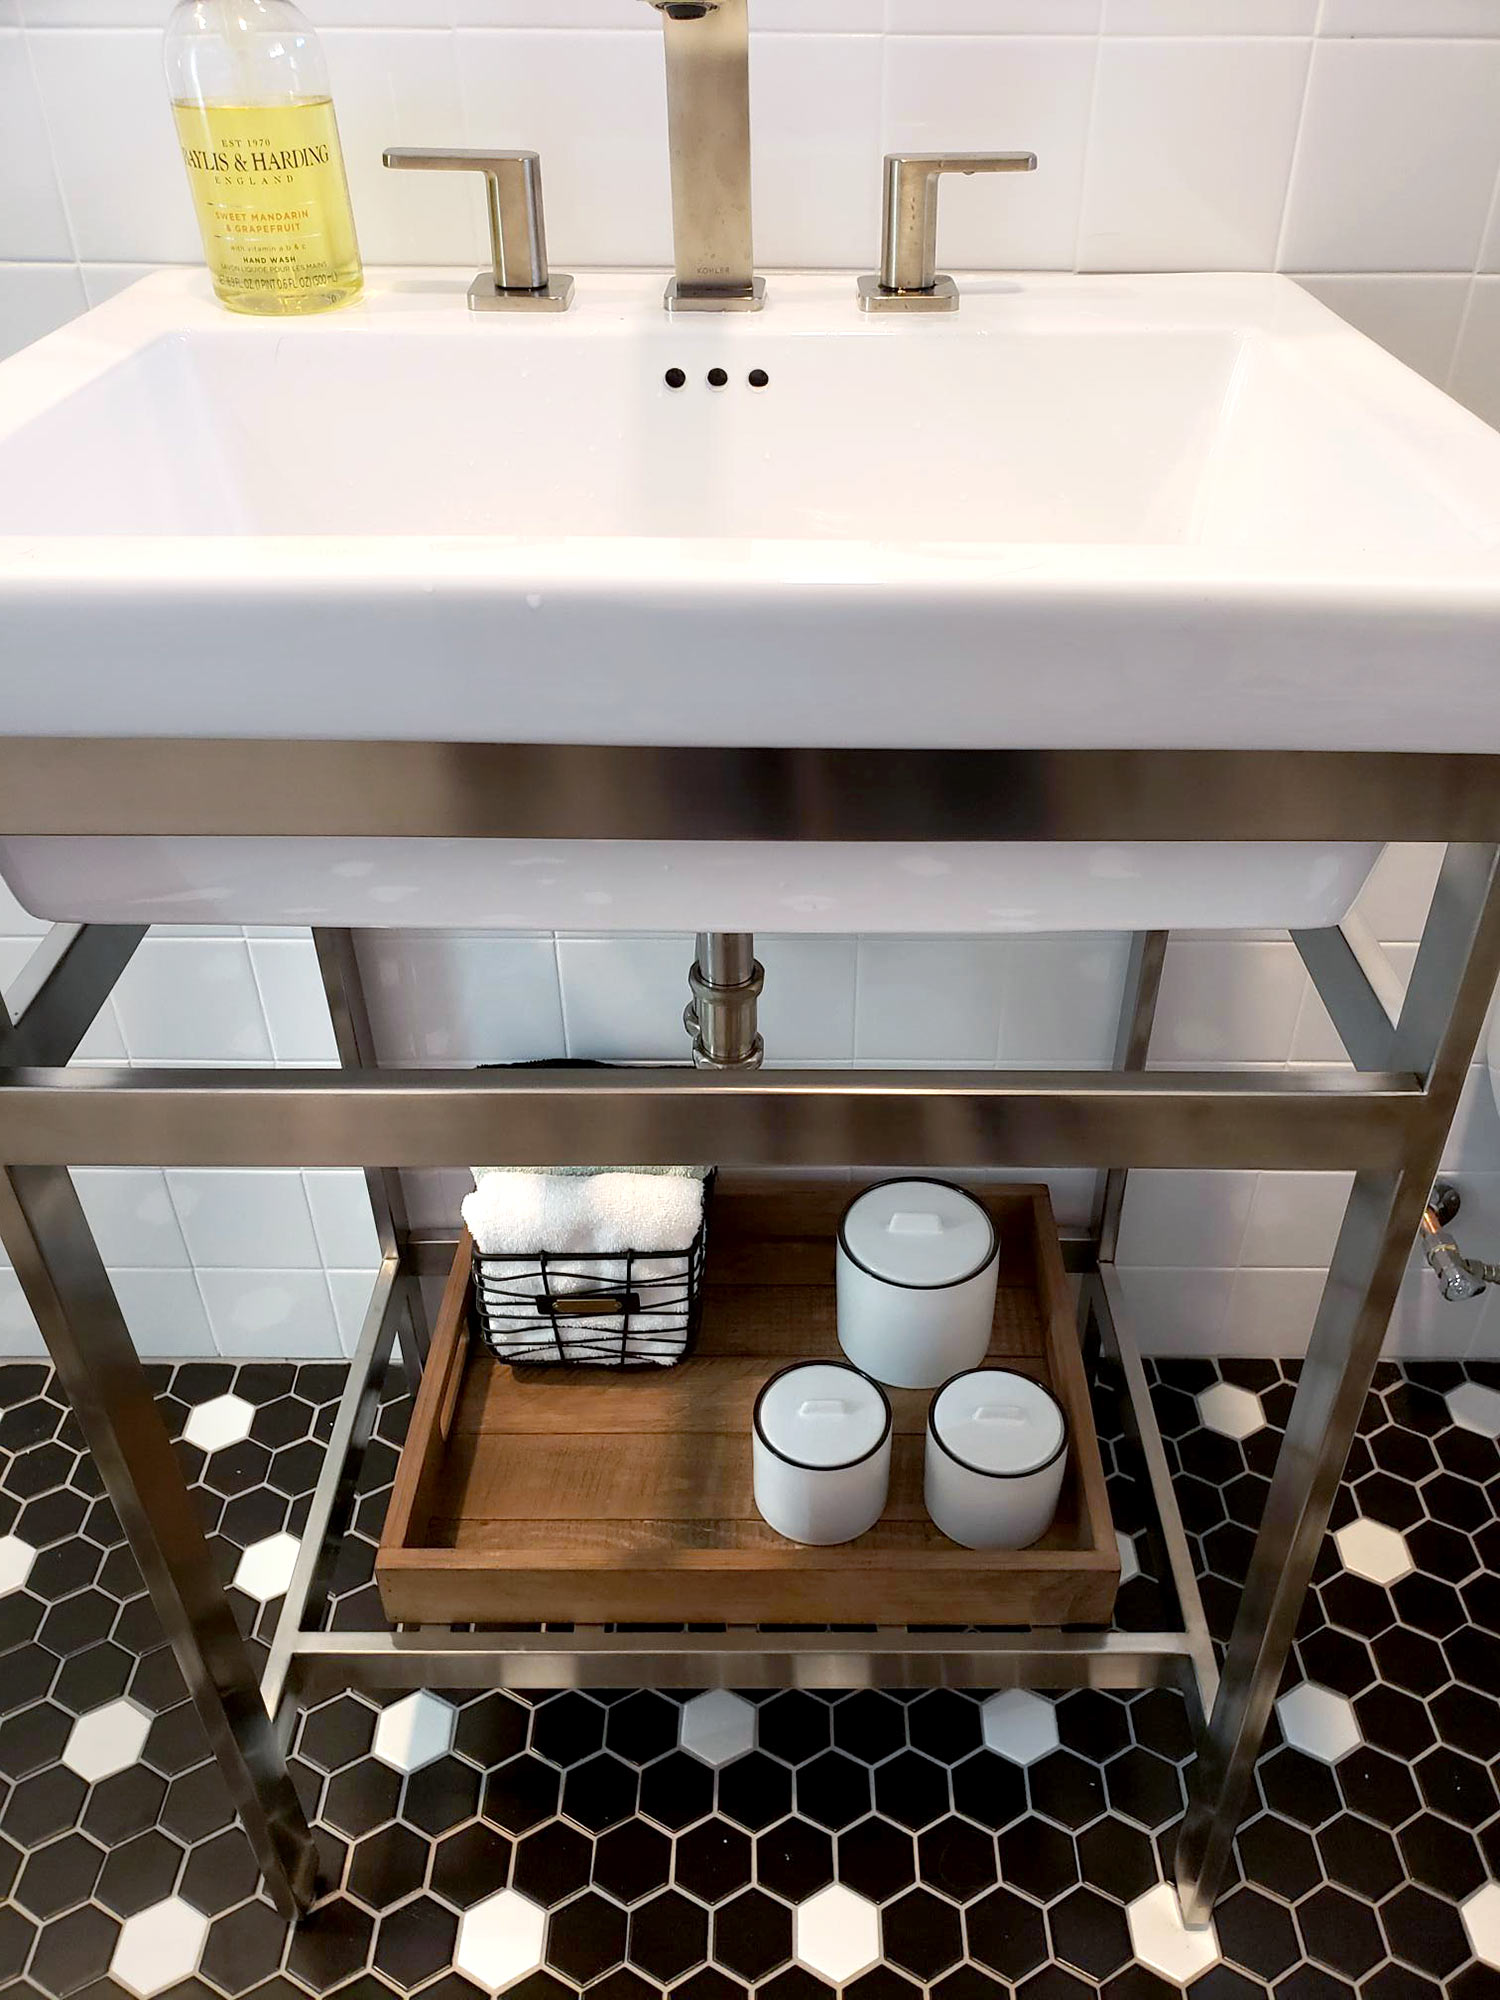 Under the sink storage was organized for use and function. Keeping things streamlined and minimal were what was important to this client.